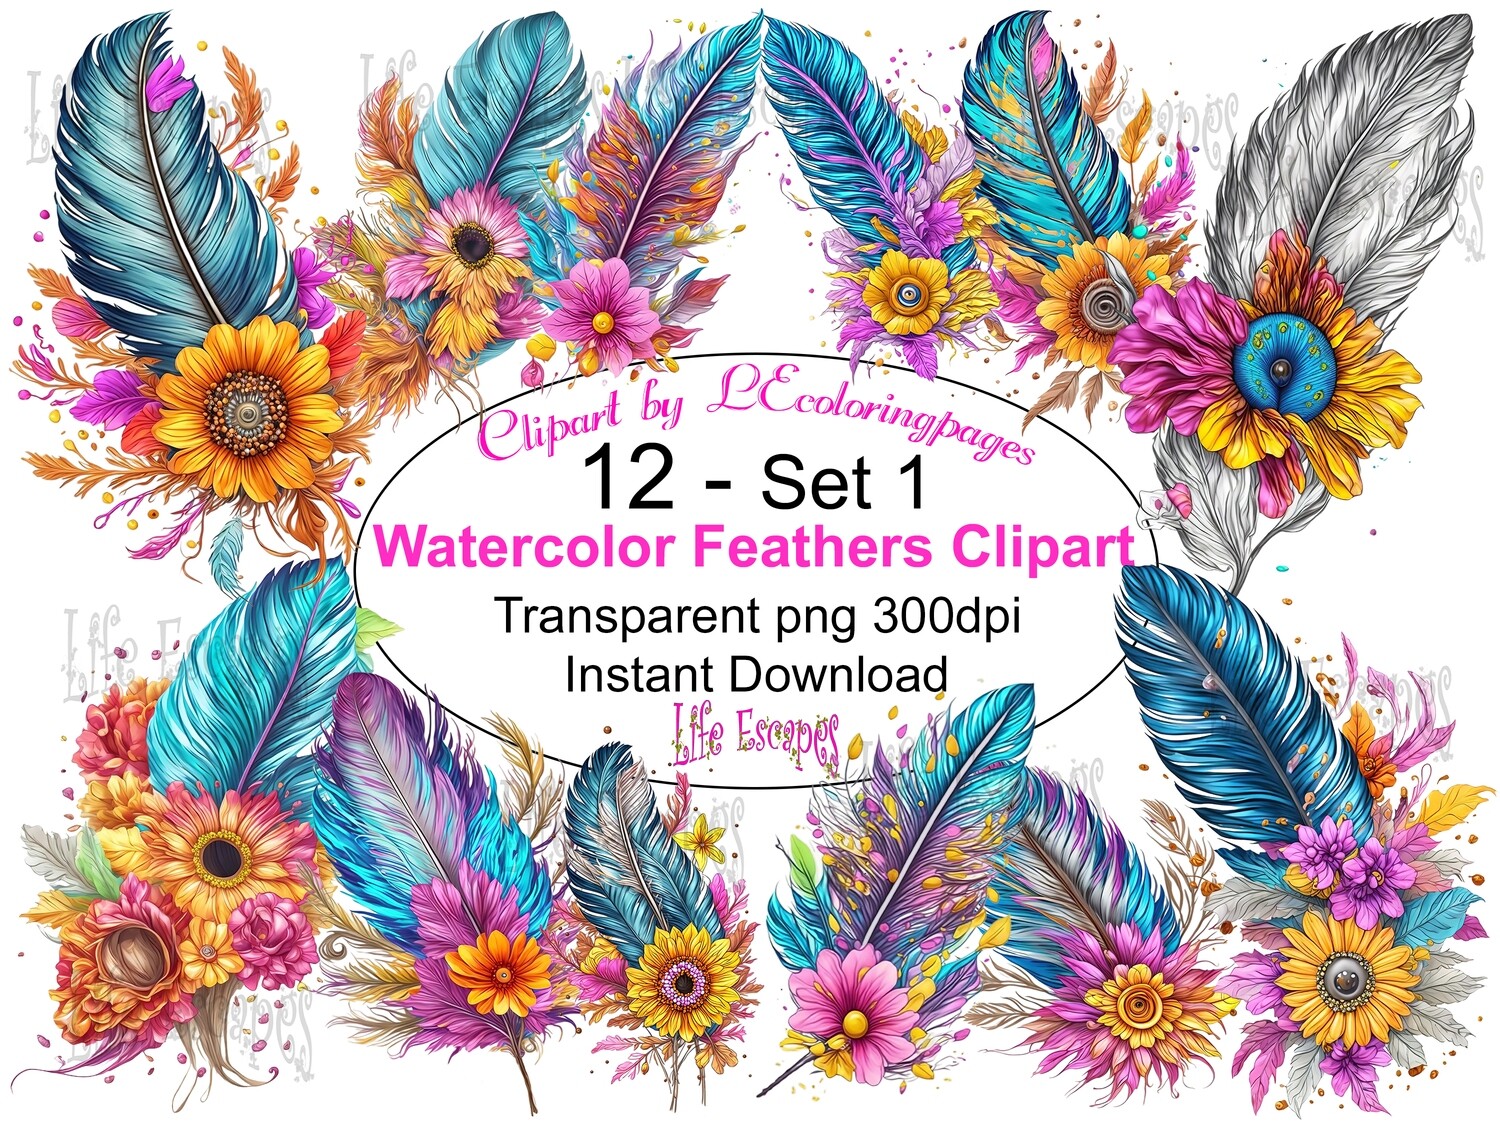 Watercolor Feather PNG set 1 - 12 Clipart Printables